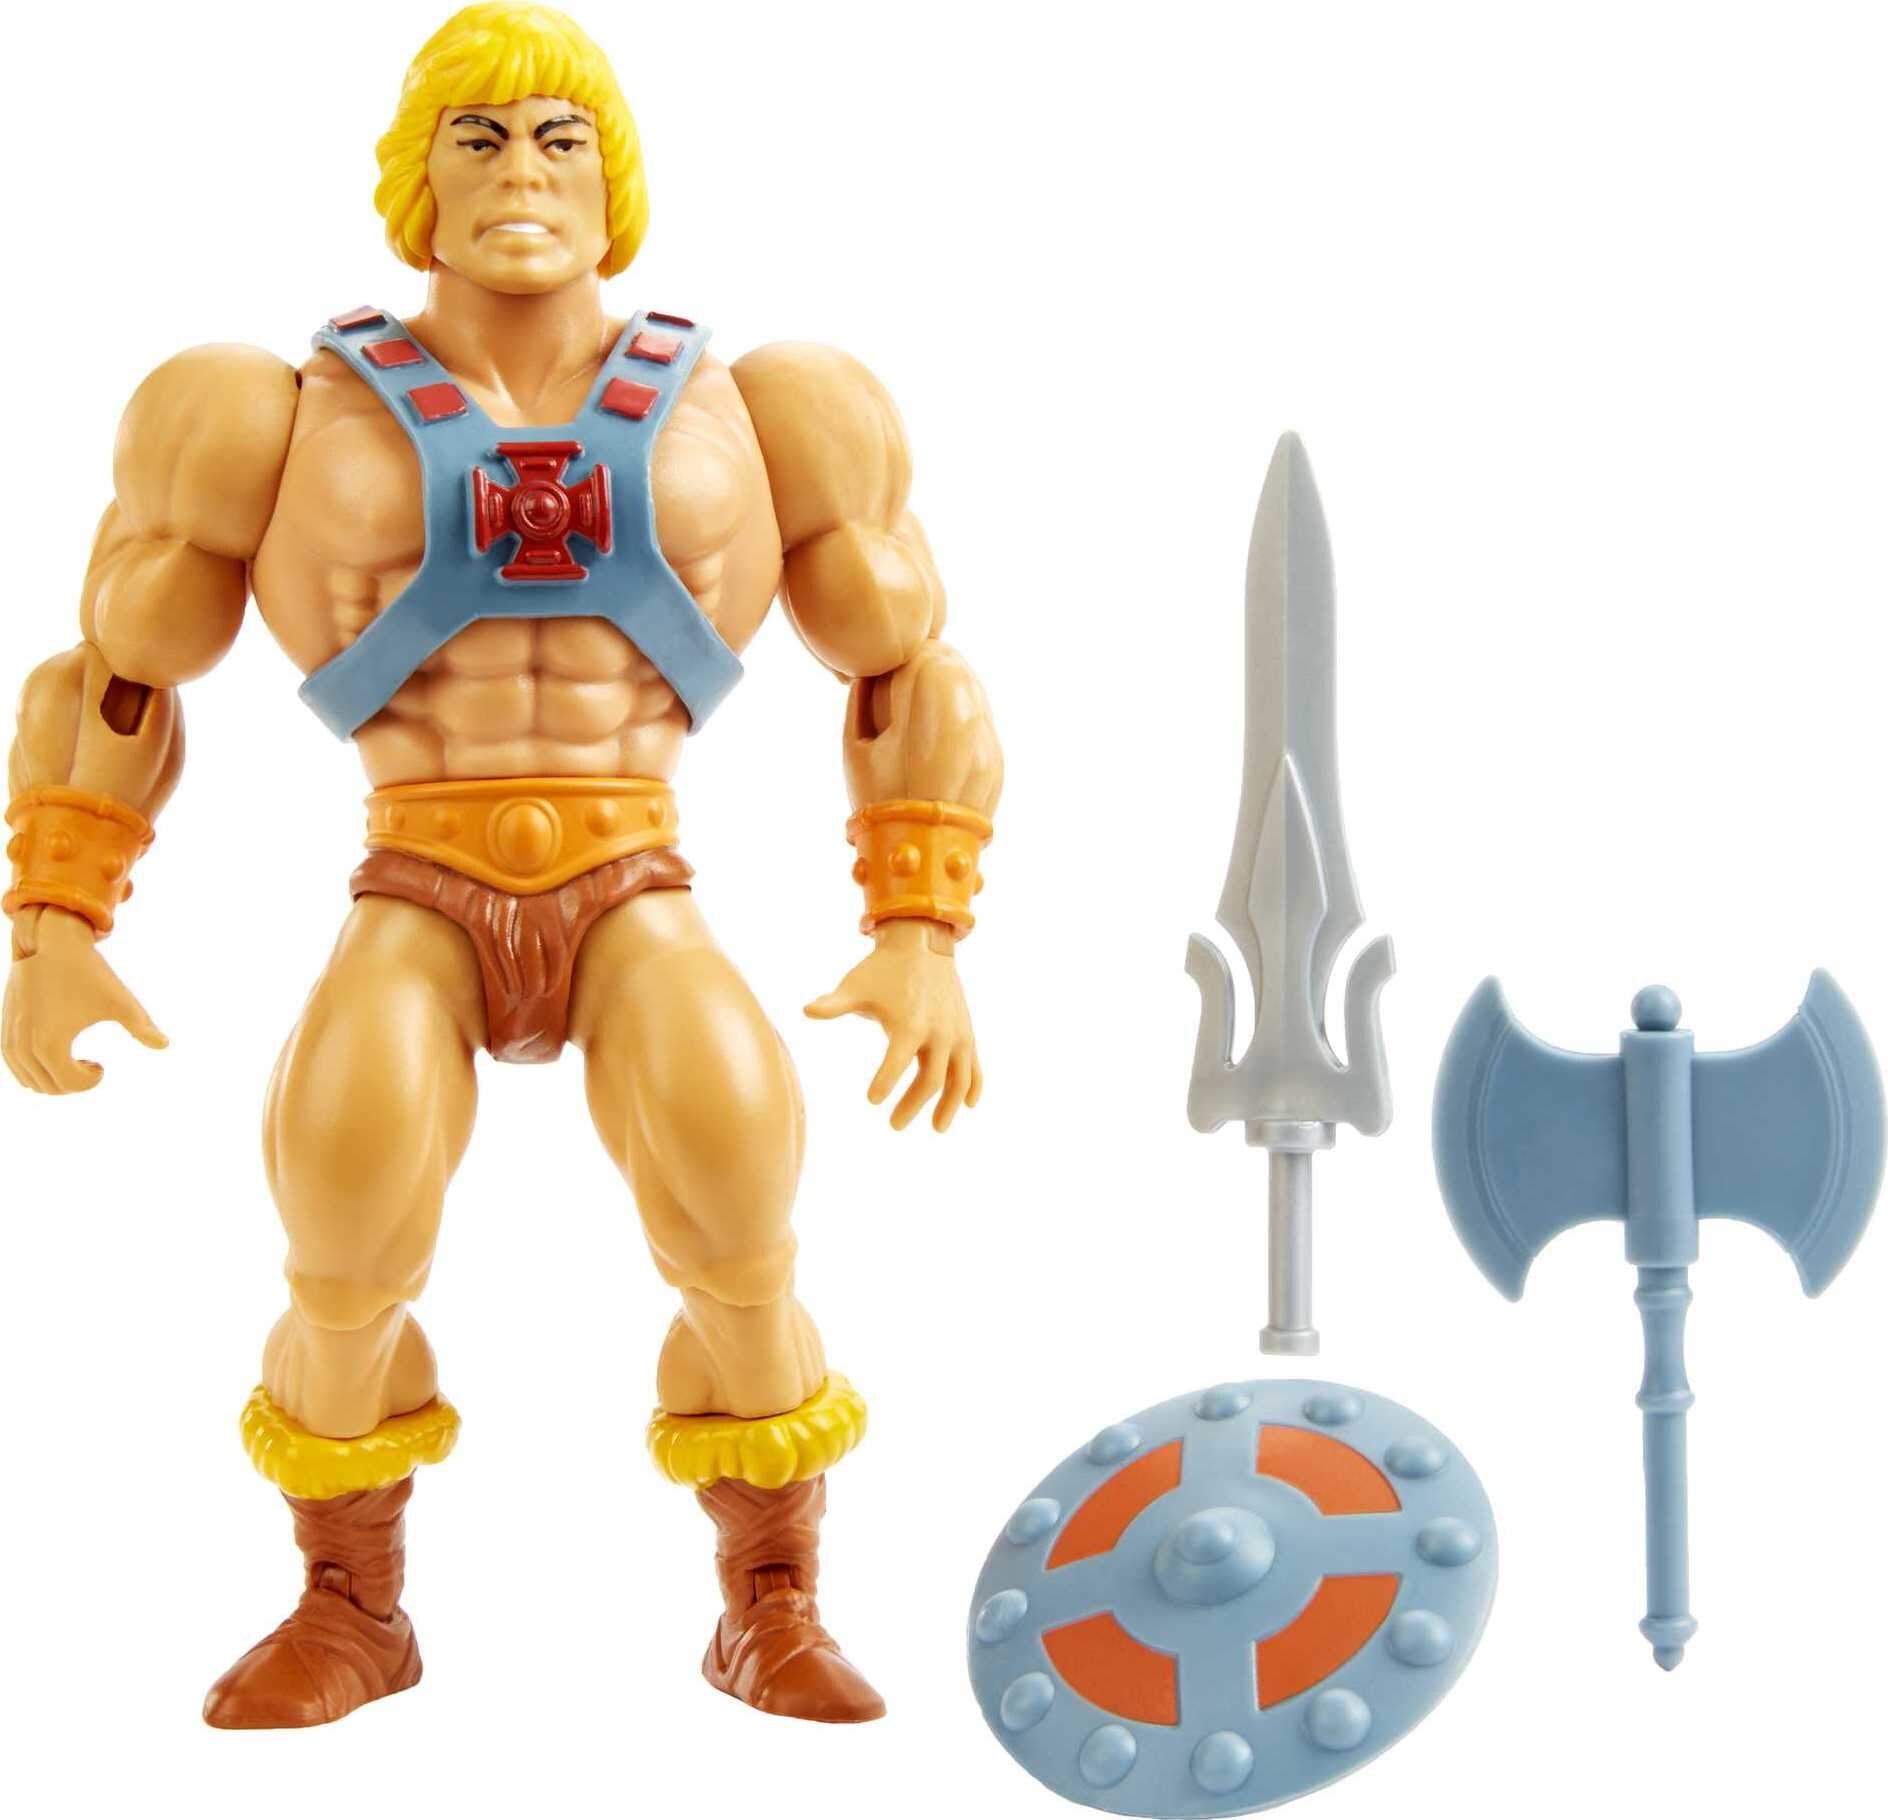 5 x Action Figure Stands He-Man BLACK Vintage Masters of the Universe MOTU 